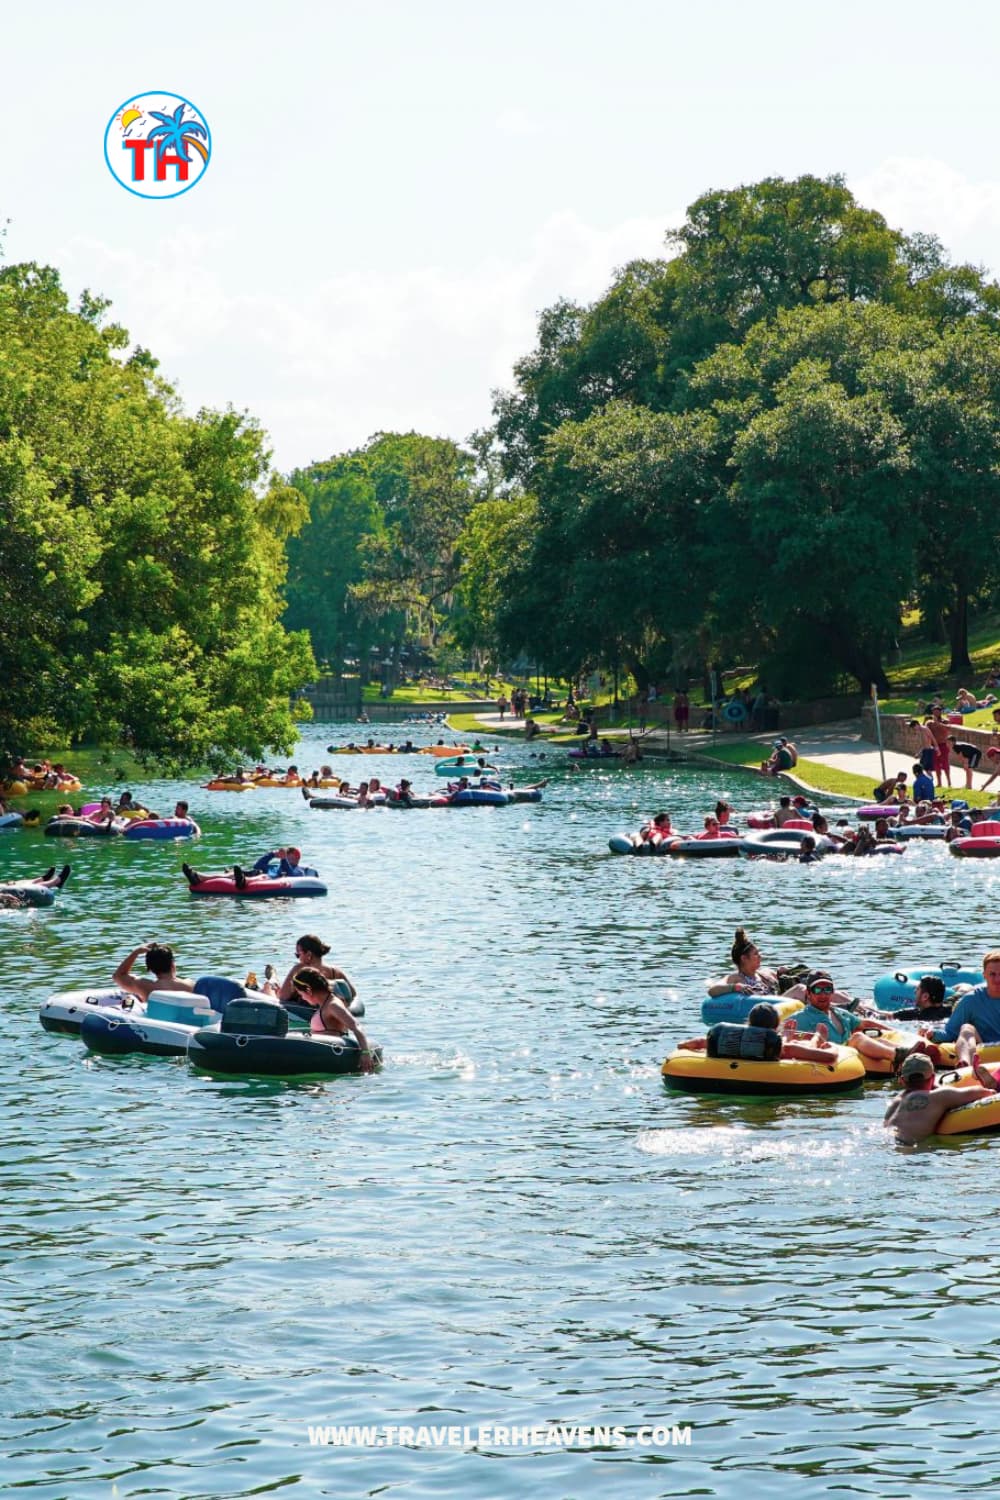 Beautiful Destinations, New Braunfels, Texas Travel Guide, Things to Do in New Braunfels for Couples, Travel to New Braunfels, Visit New Braunfels